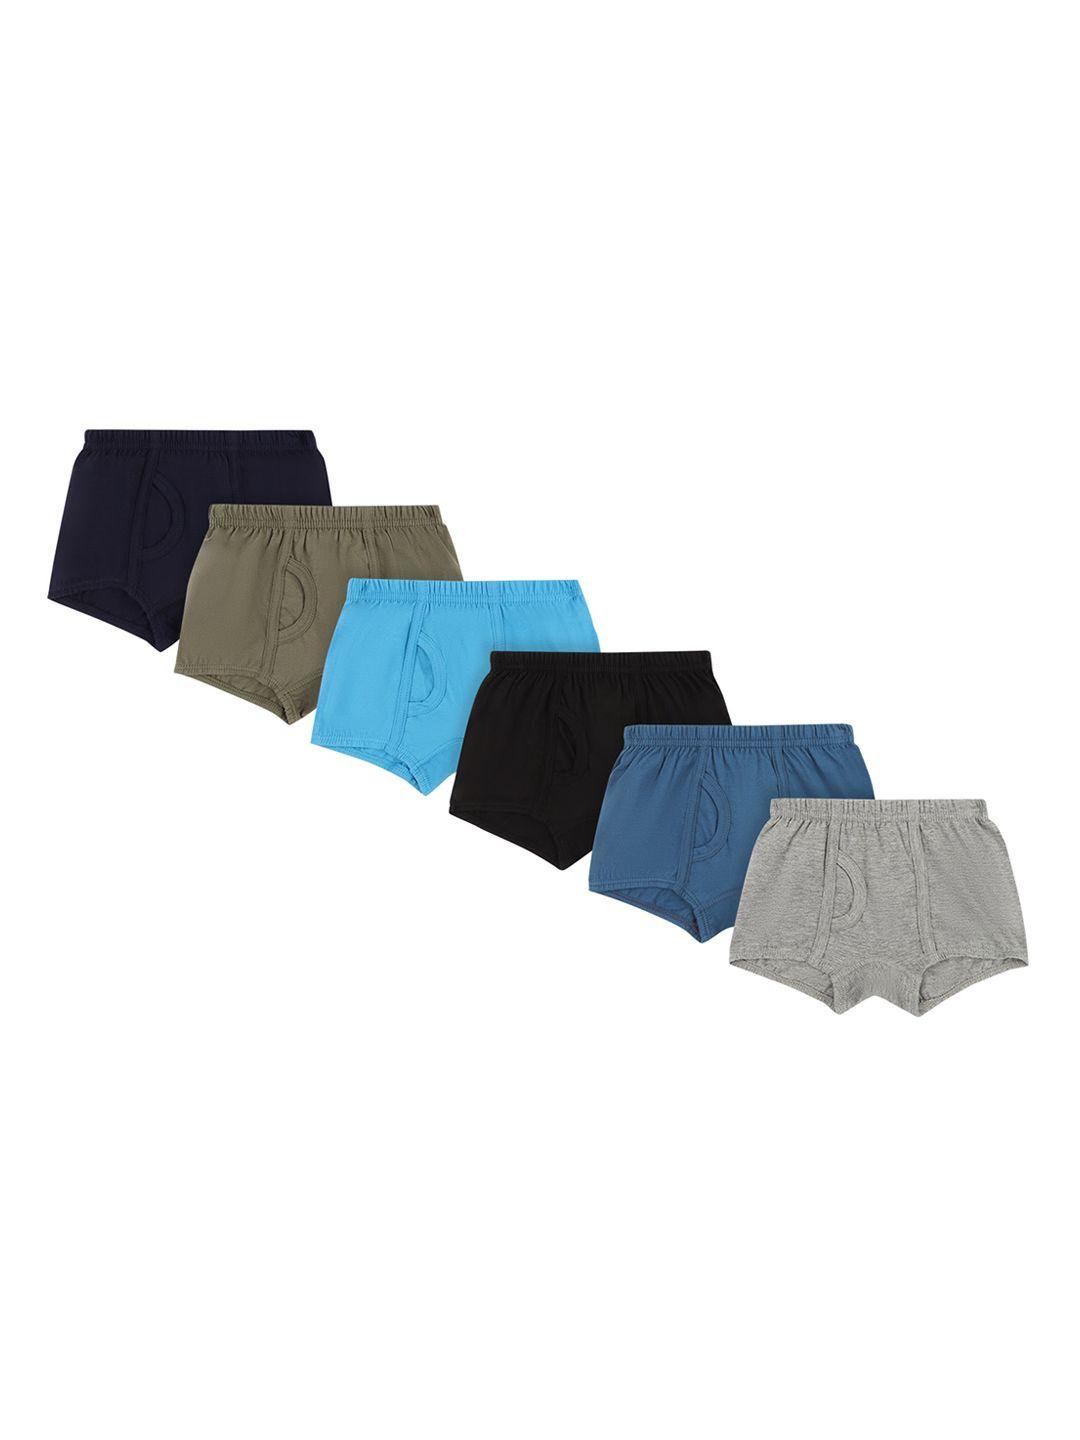 bodycare kids boys pack of 6 assorted cotton trunk